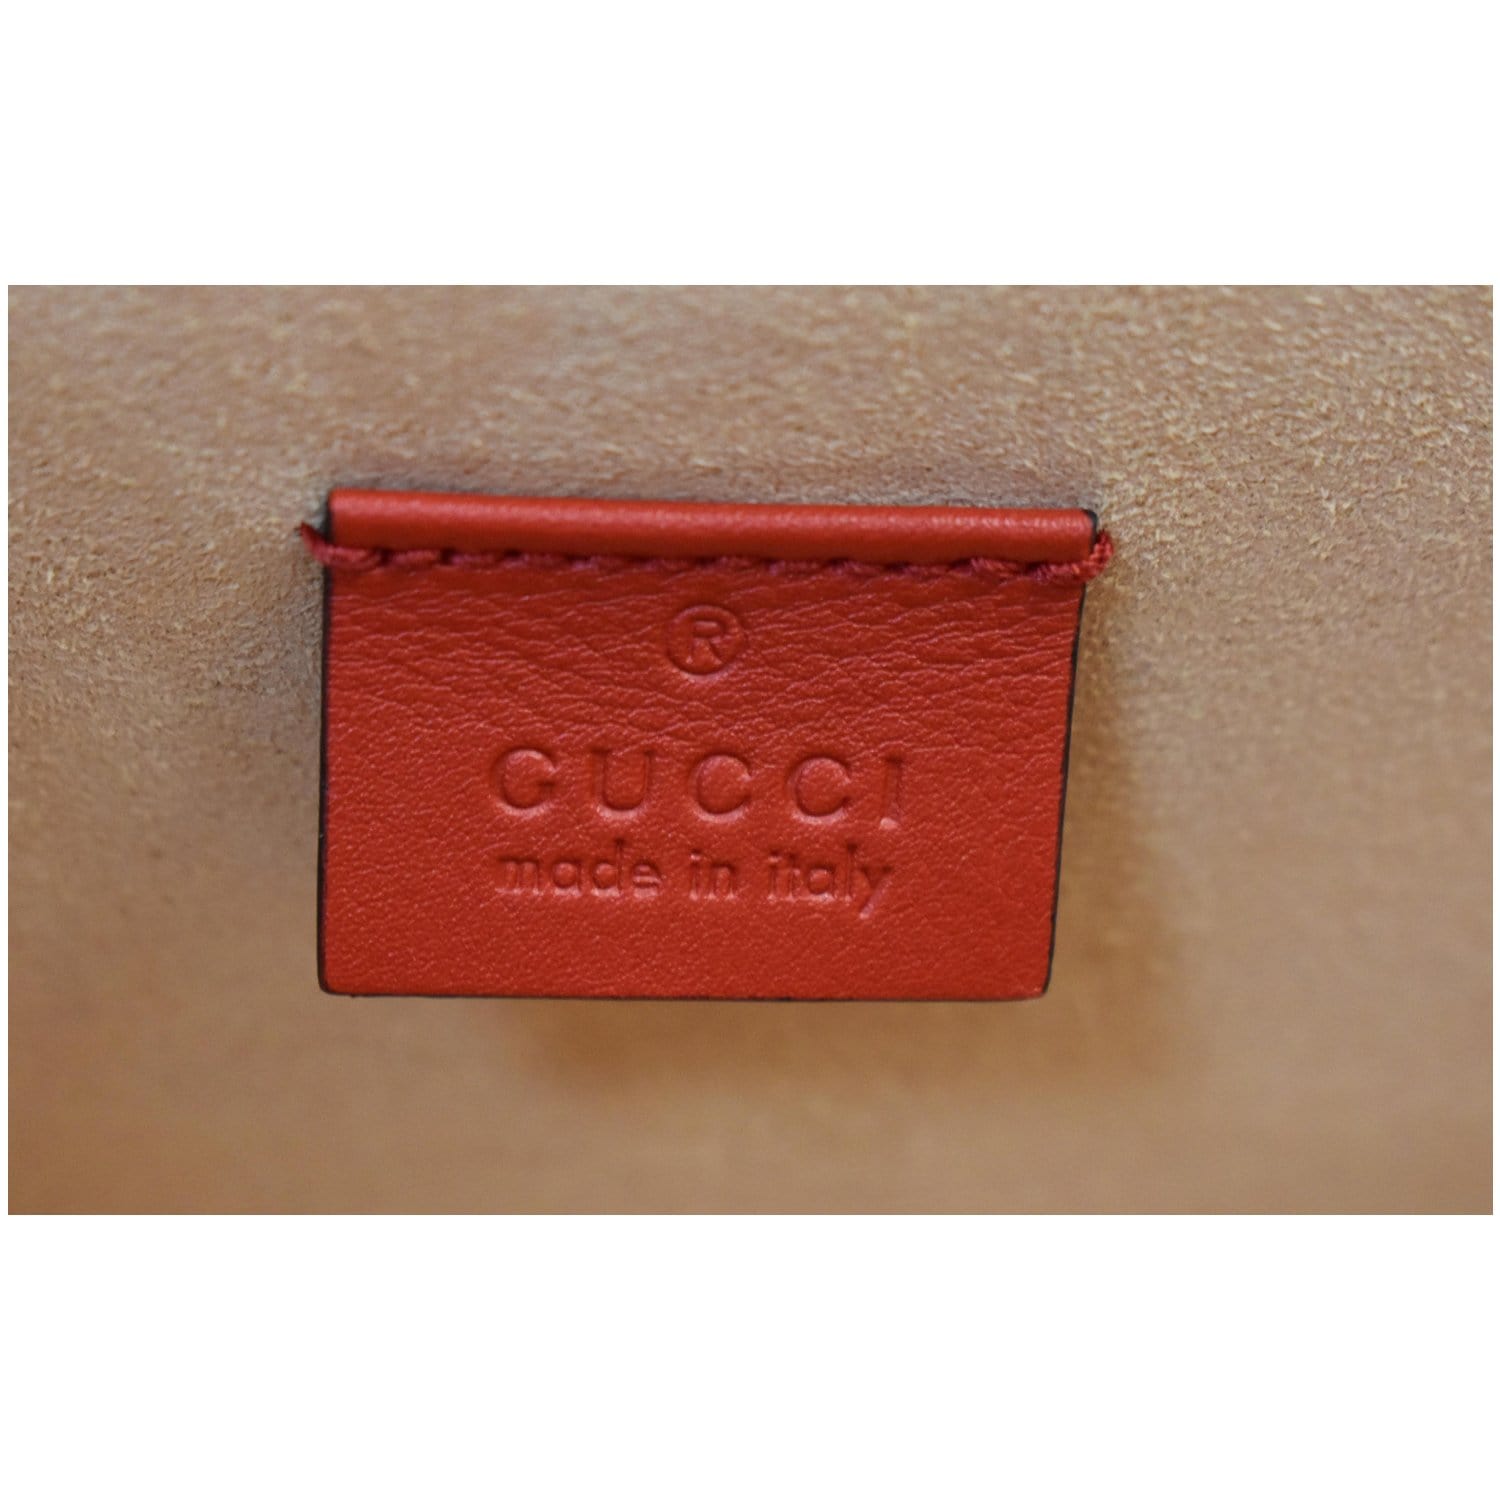 Gucci Ophidia GG Toiletry case converted into a shoulder bag/purse- an over  $1,000 hack!! 